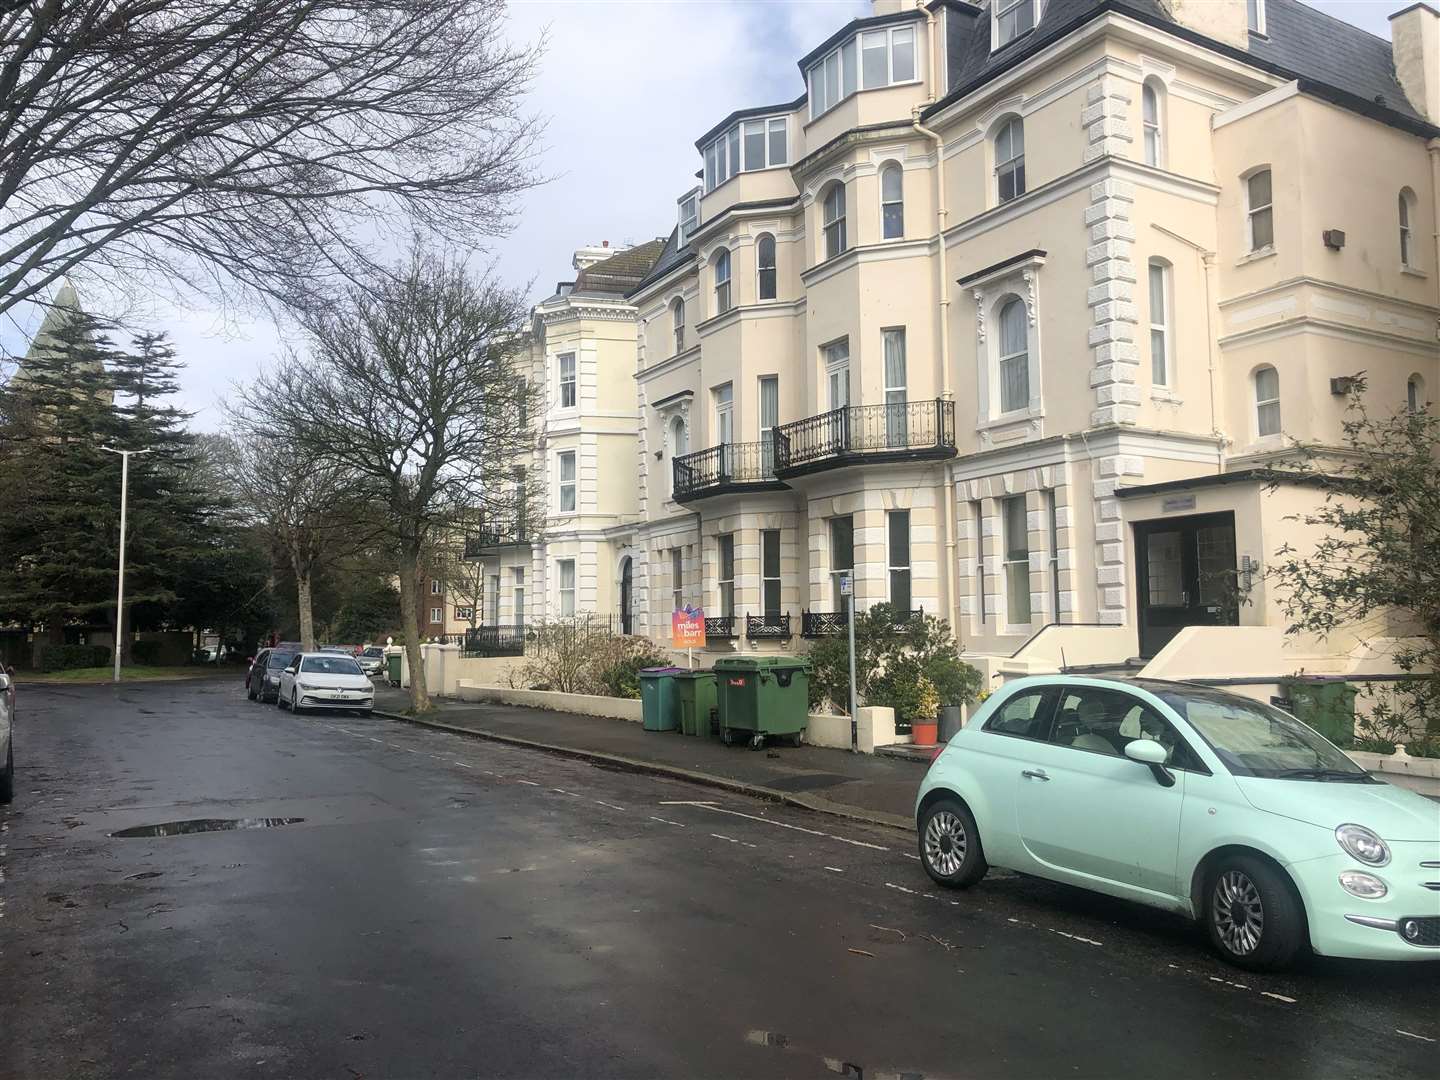 Trinity Crescent in Folkestone has four Airbnbs